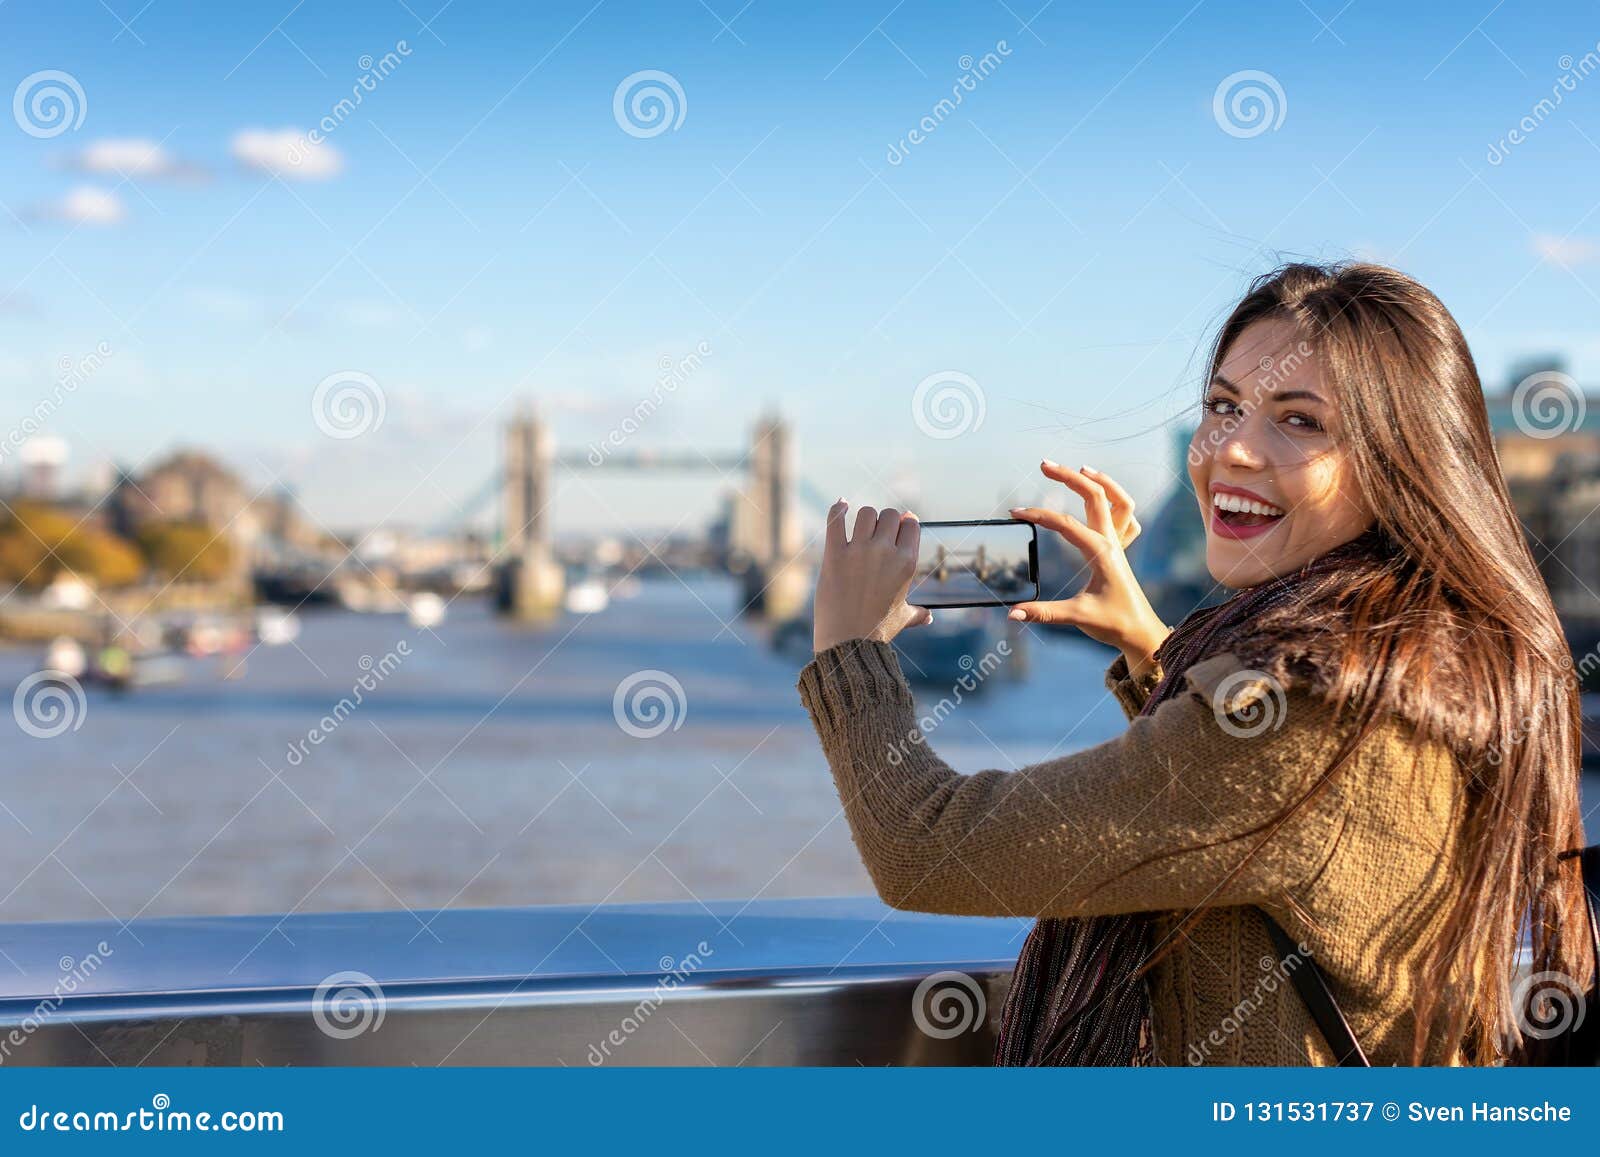 female london tourist is taking pictures of the tower bridge